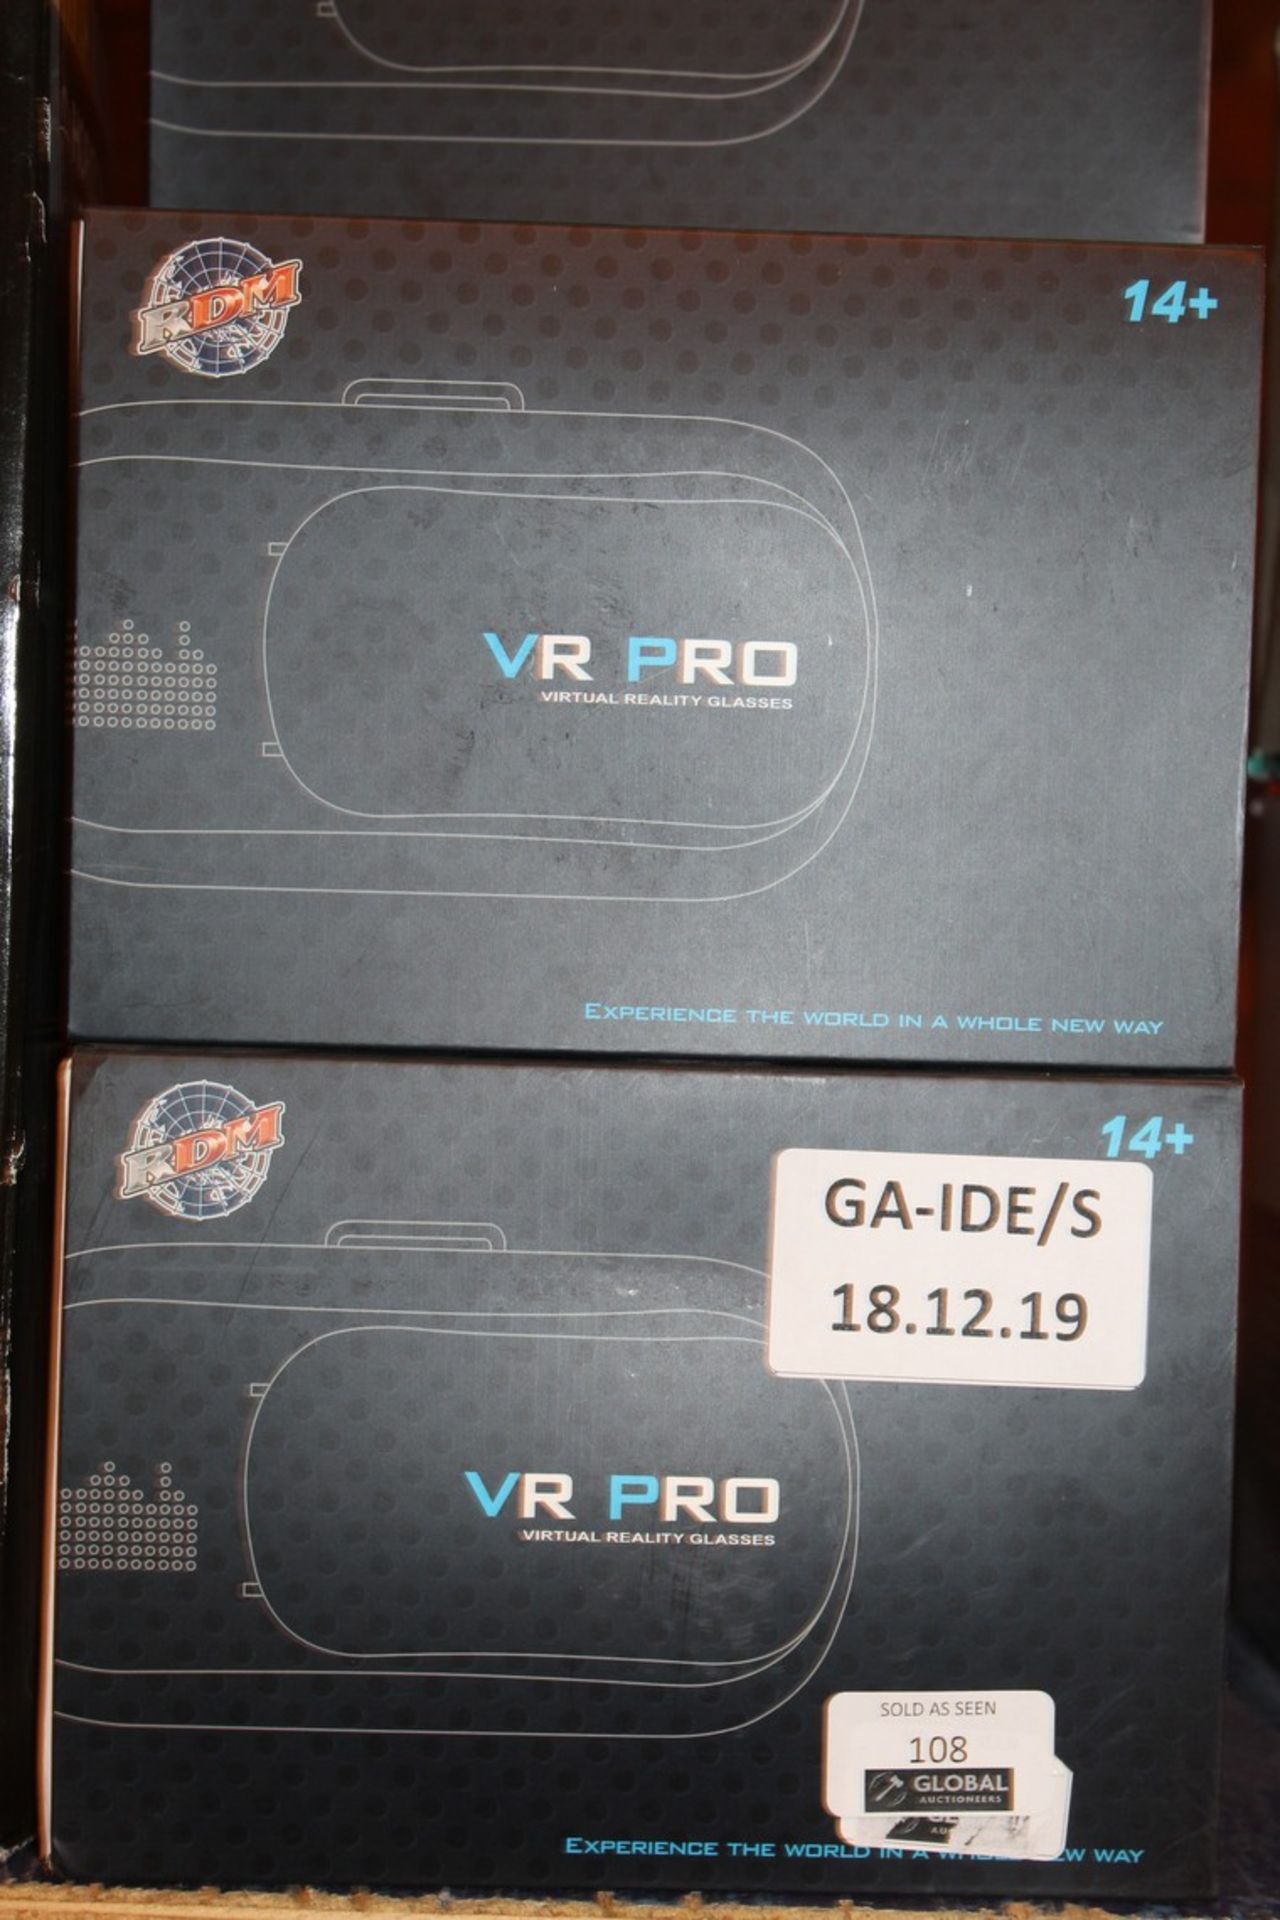 Lot to Contain 5 Boxed VR Pro IDM Virtual Reality